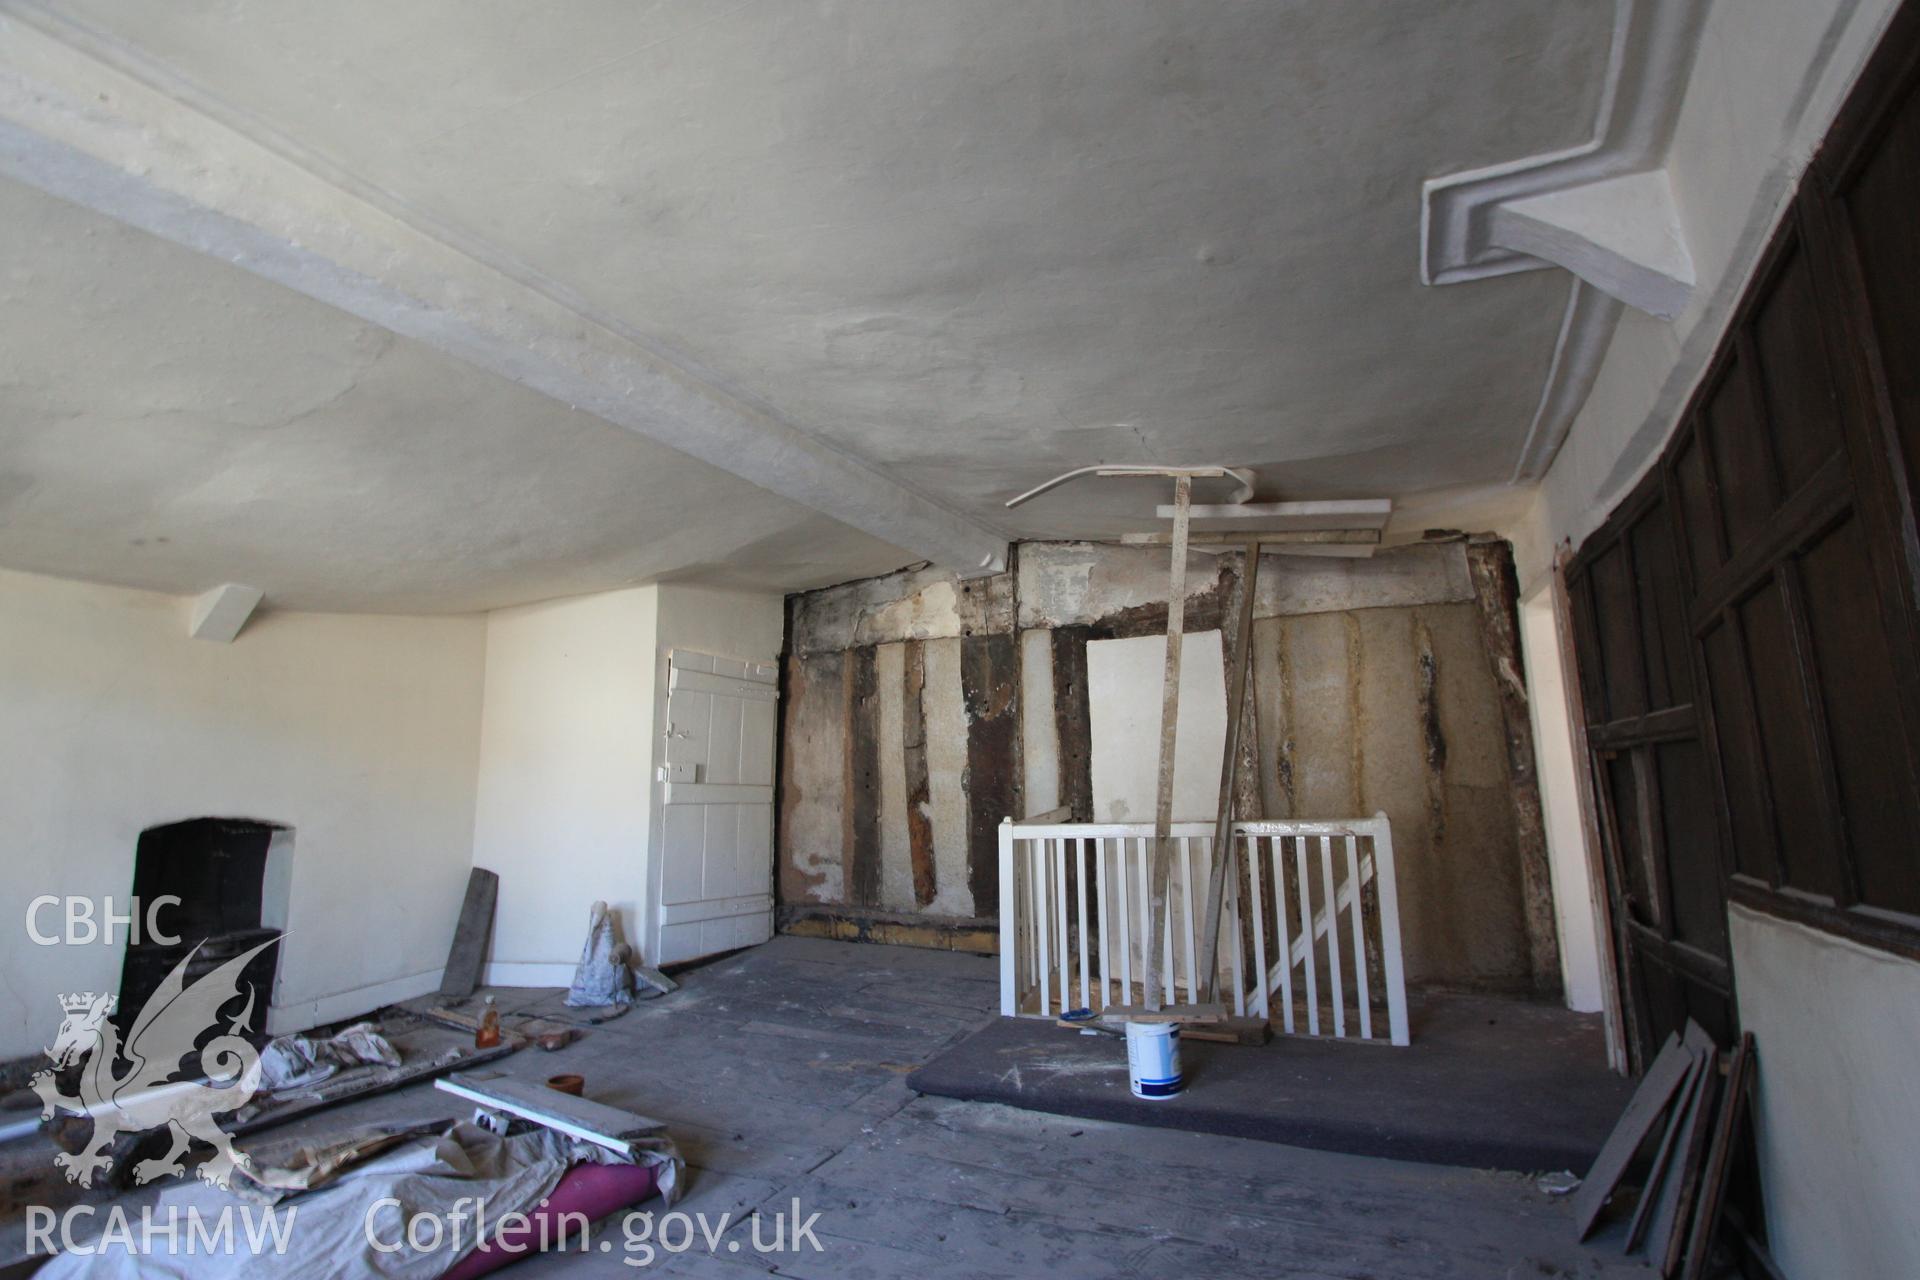 Colour photograph showing interior view of first floor chamber of cross-wing, timber frame and plastered wall at Porth-y-Dwr, 67 Clwyd Street, Ruthin. Photographed during survey conducted by Geoff Ward on 10th June 2013.